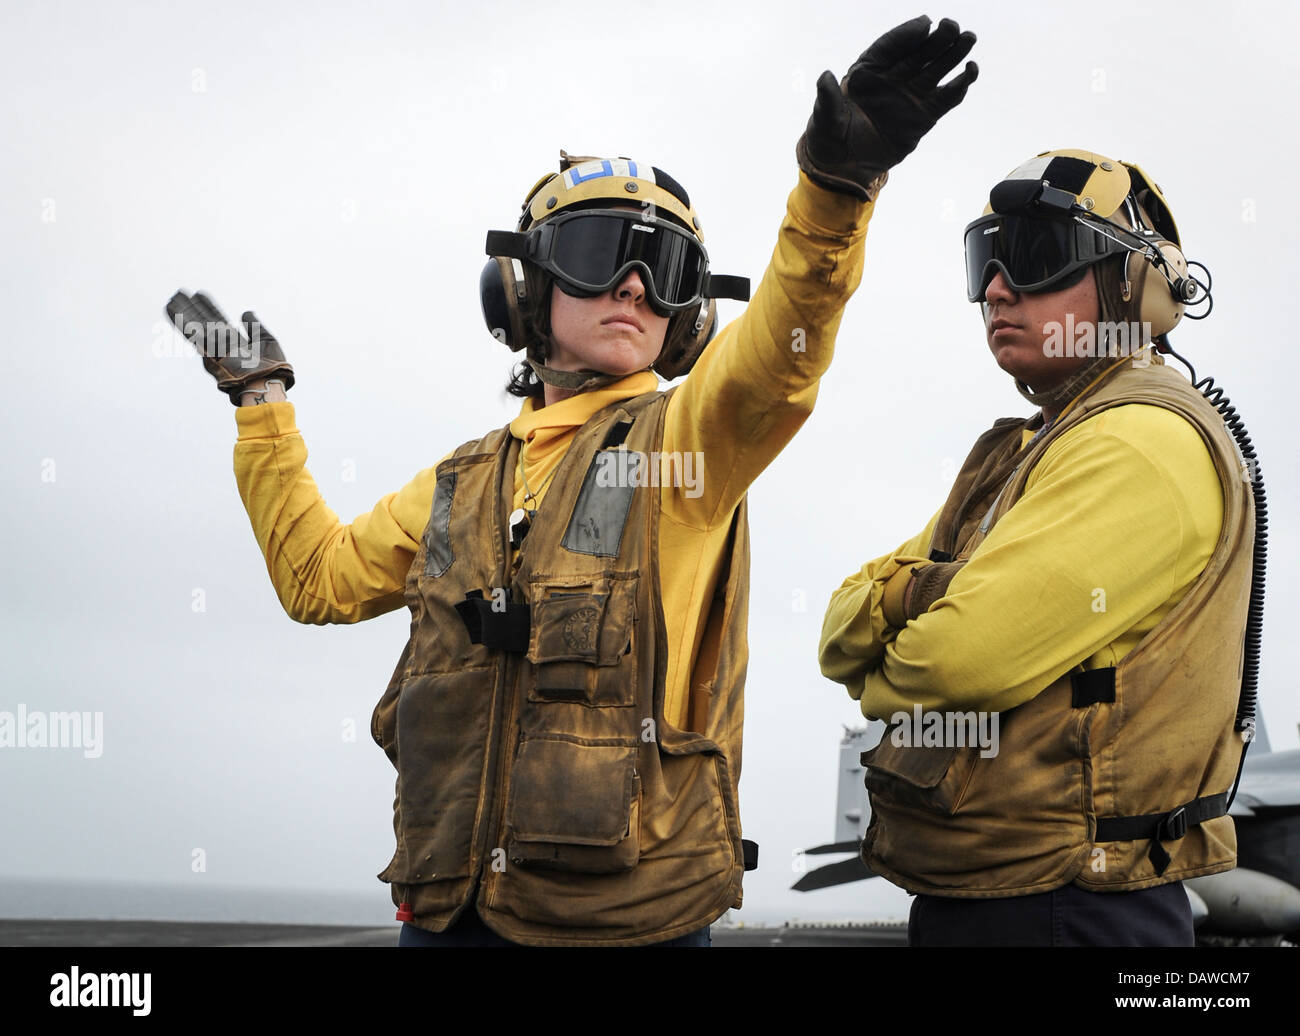 A US Navy Aviation Boatswain’s Mate receives training on aircraft hand signals on the flight deck of the aircraft carrier USS Nimitz July 15, 2013 in the Gulf of Oman. Stock Photo